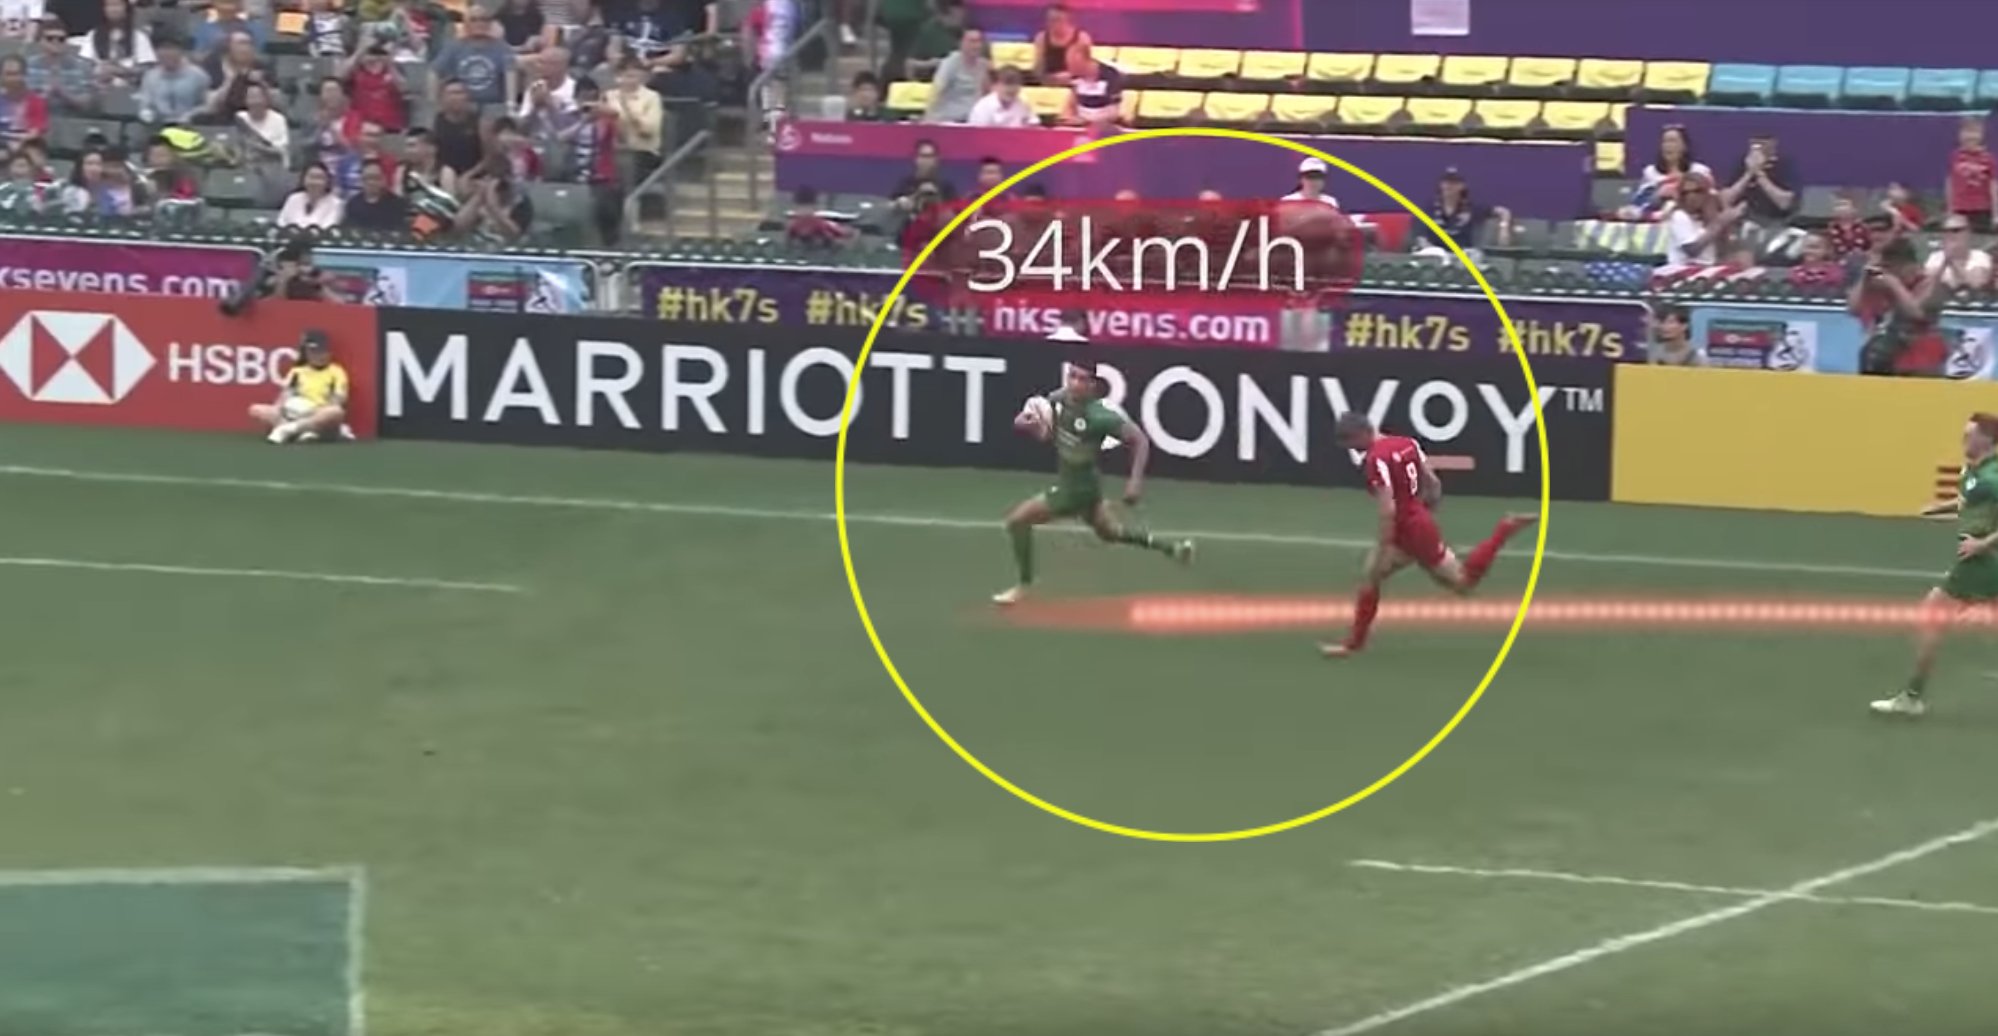 WATCH: New video reveals the RIDICULOUS speeds that 7s player racked up this weekend